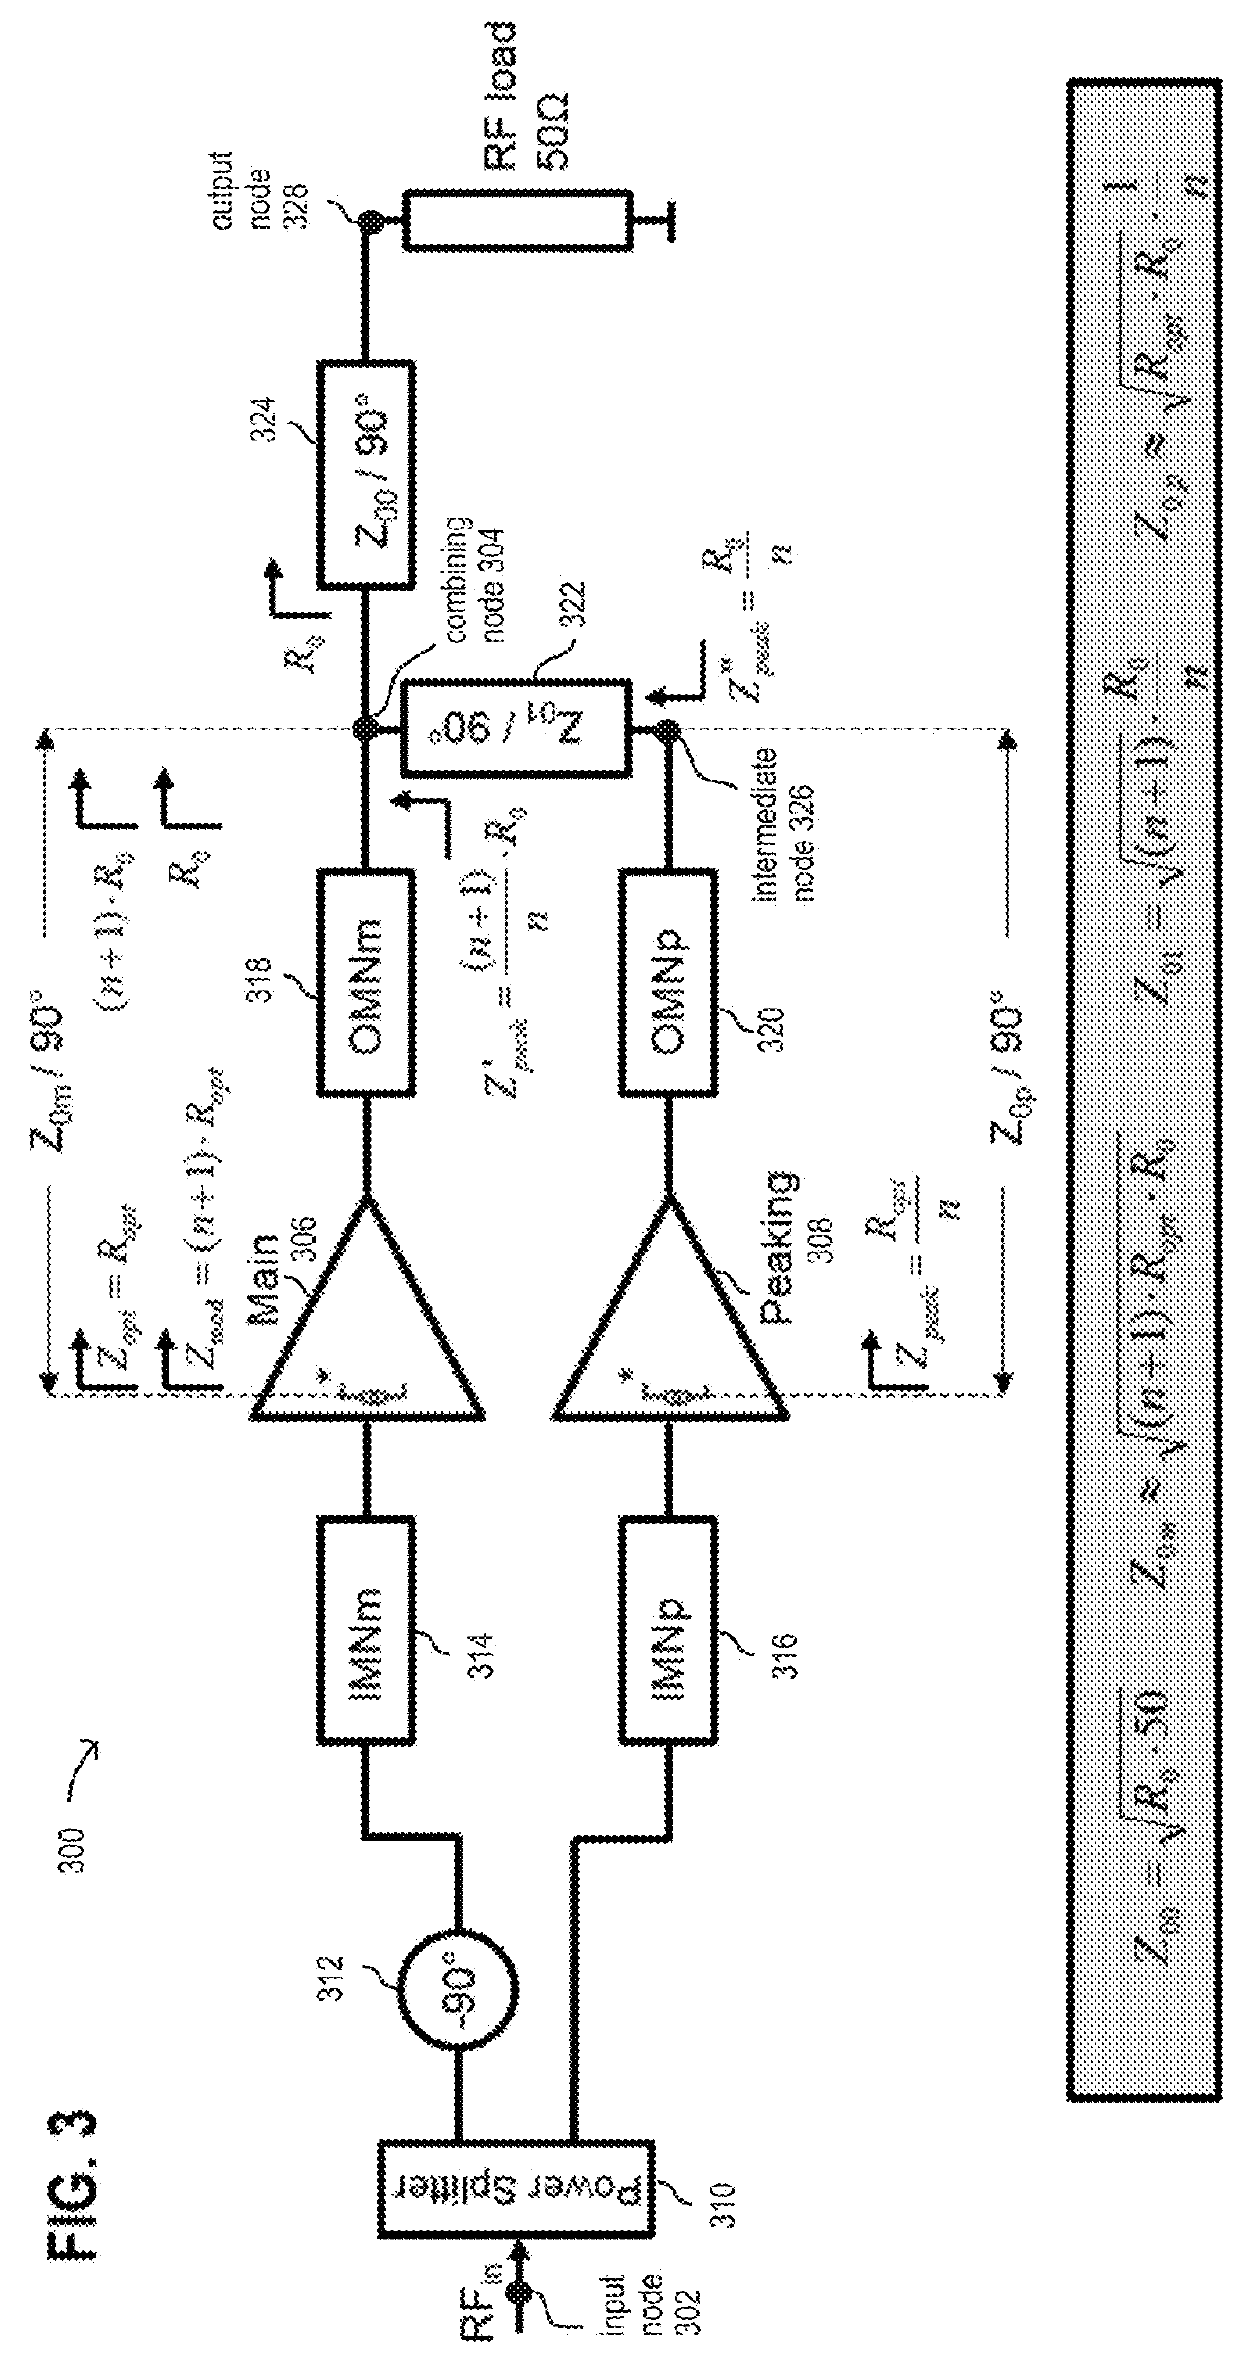 Doherty architecture for wideband power amplifier design